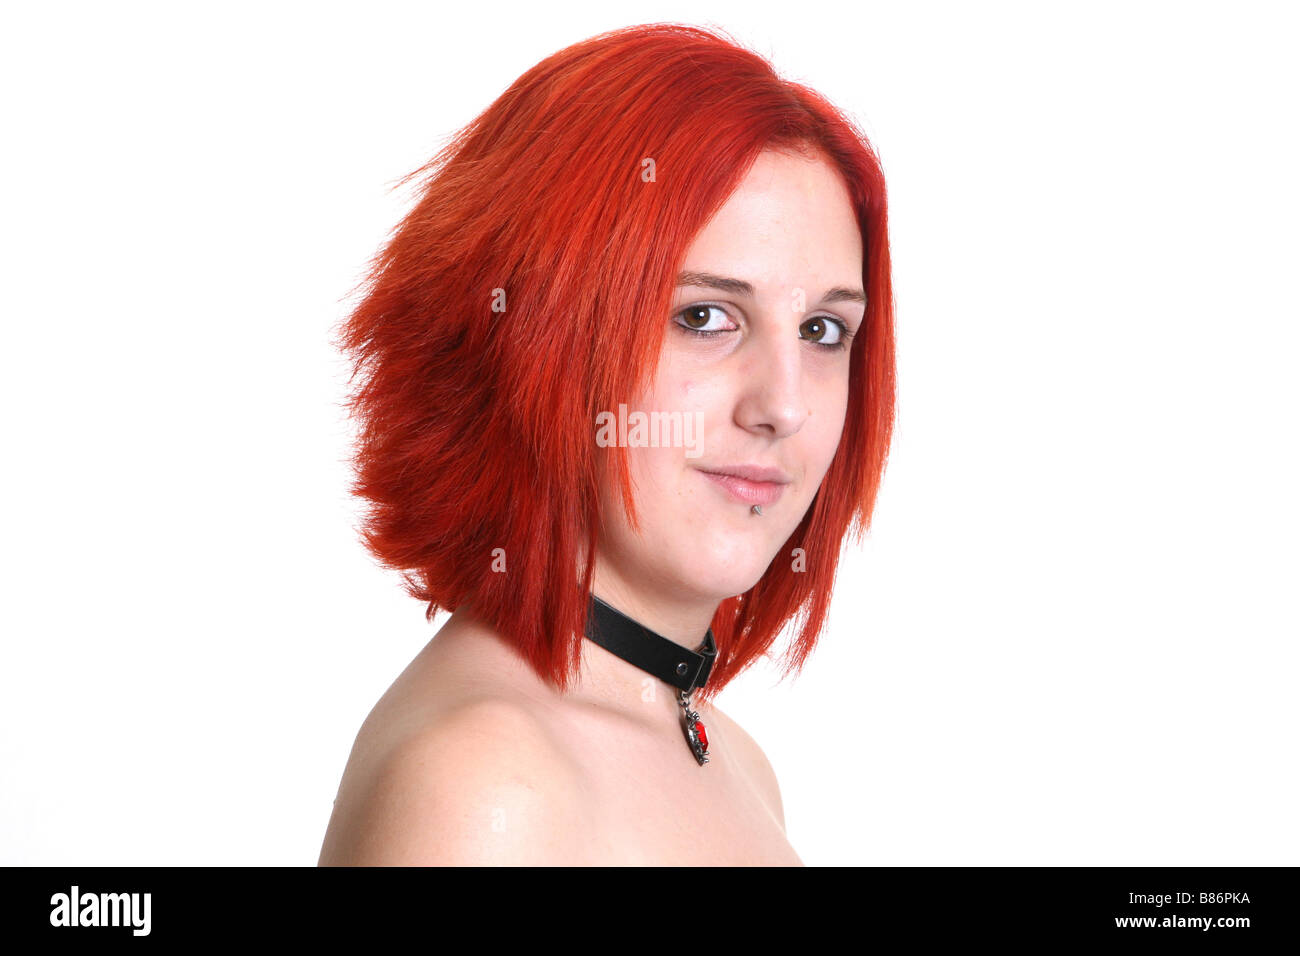 Girl with bright red hair Stock Photo